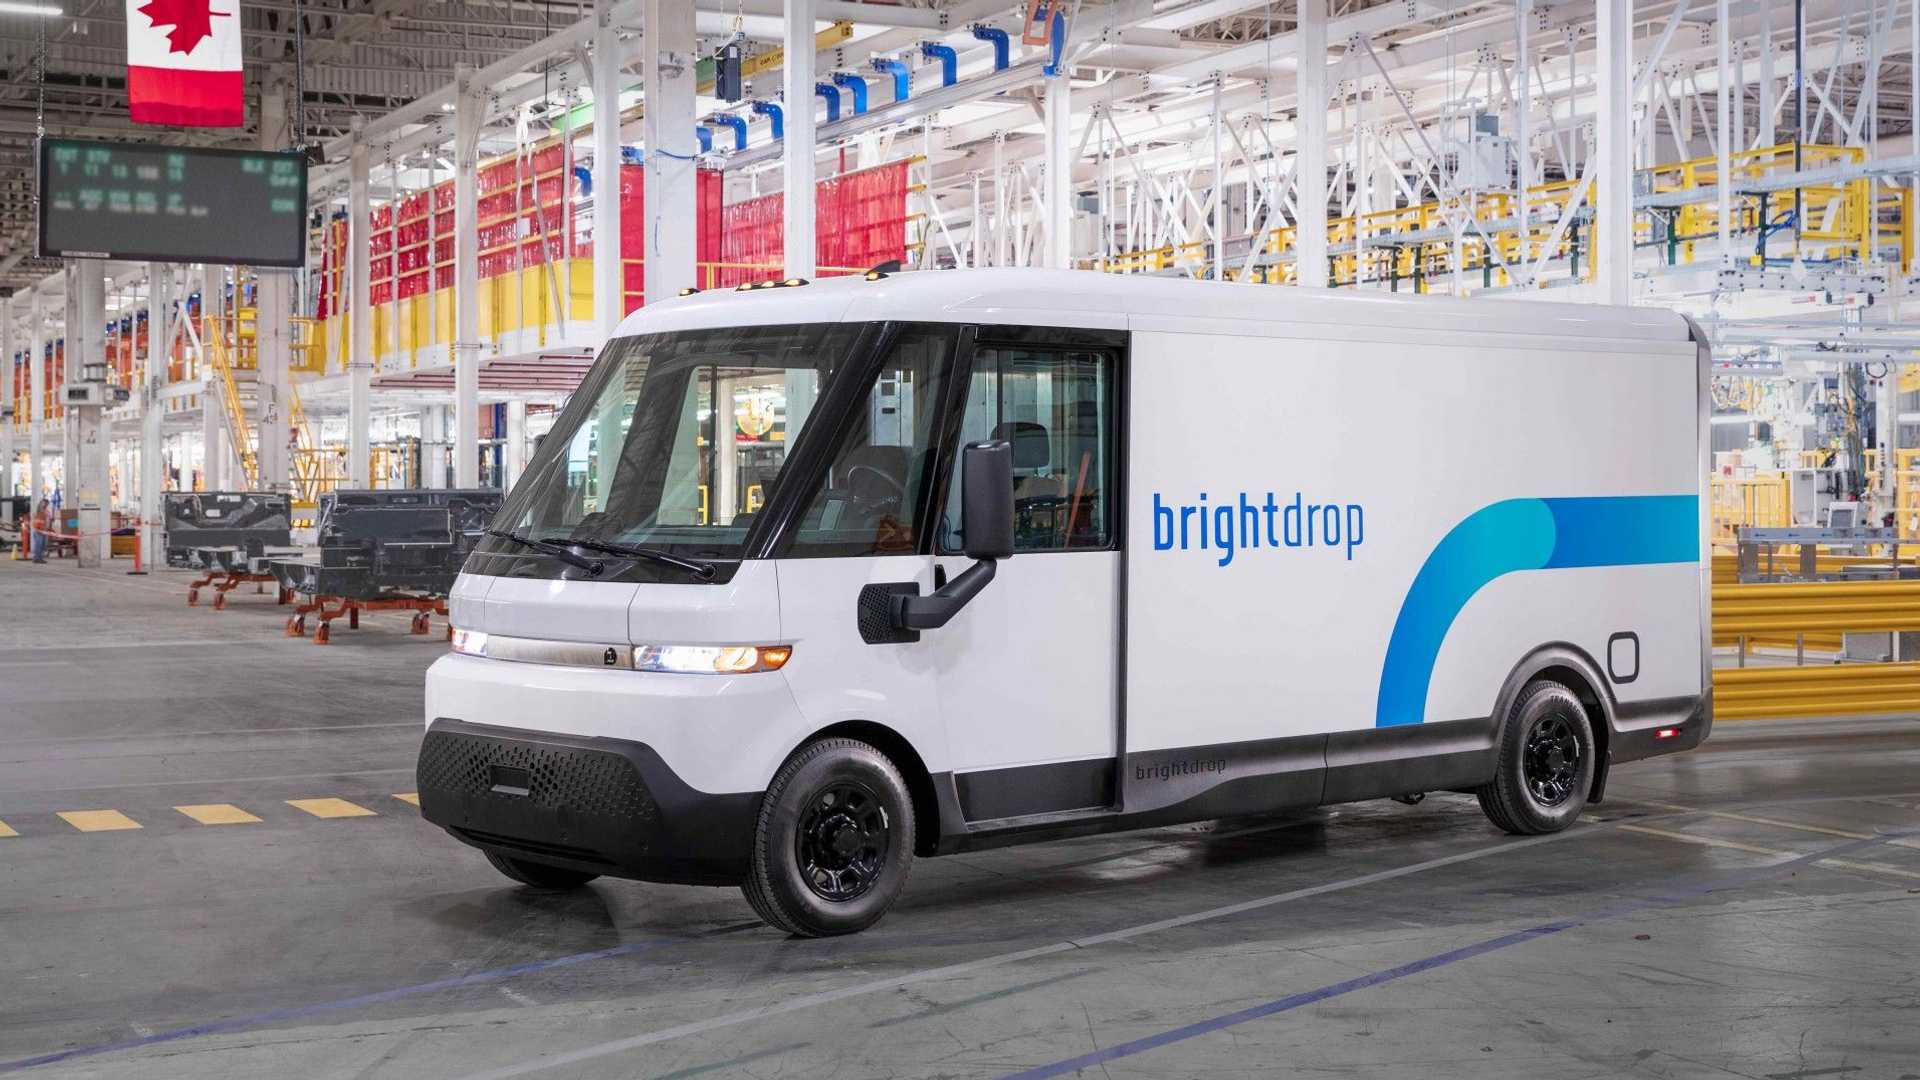 gm resumes production of brightdrop zevo 600 electric vans in canada